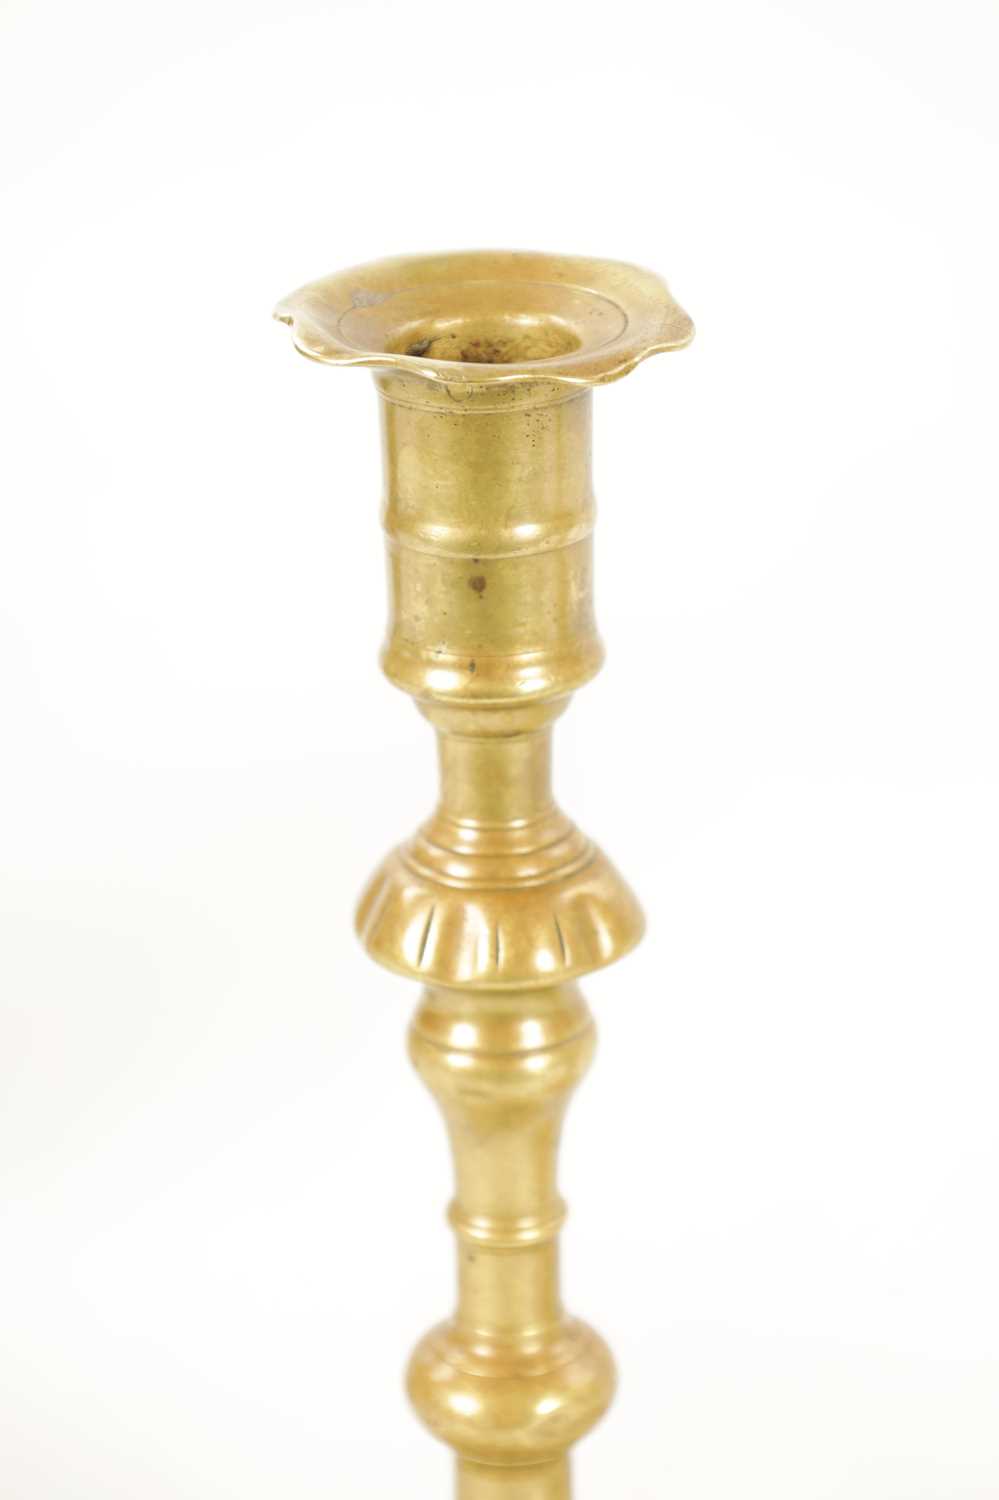 A PAIR OF MID 18TH CENTURY SEAMED CAST BRASS CANDLESTICKS - Image 4 of 8